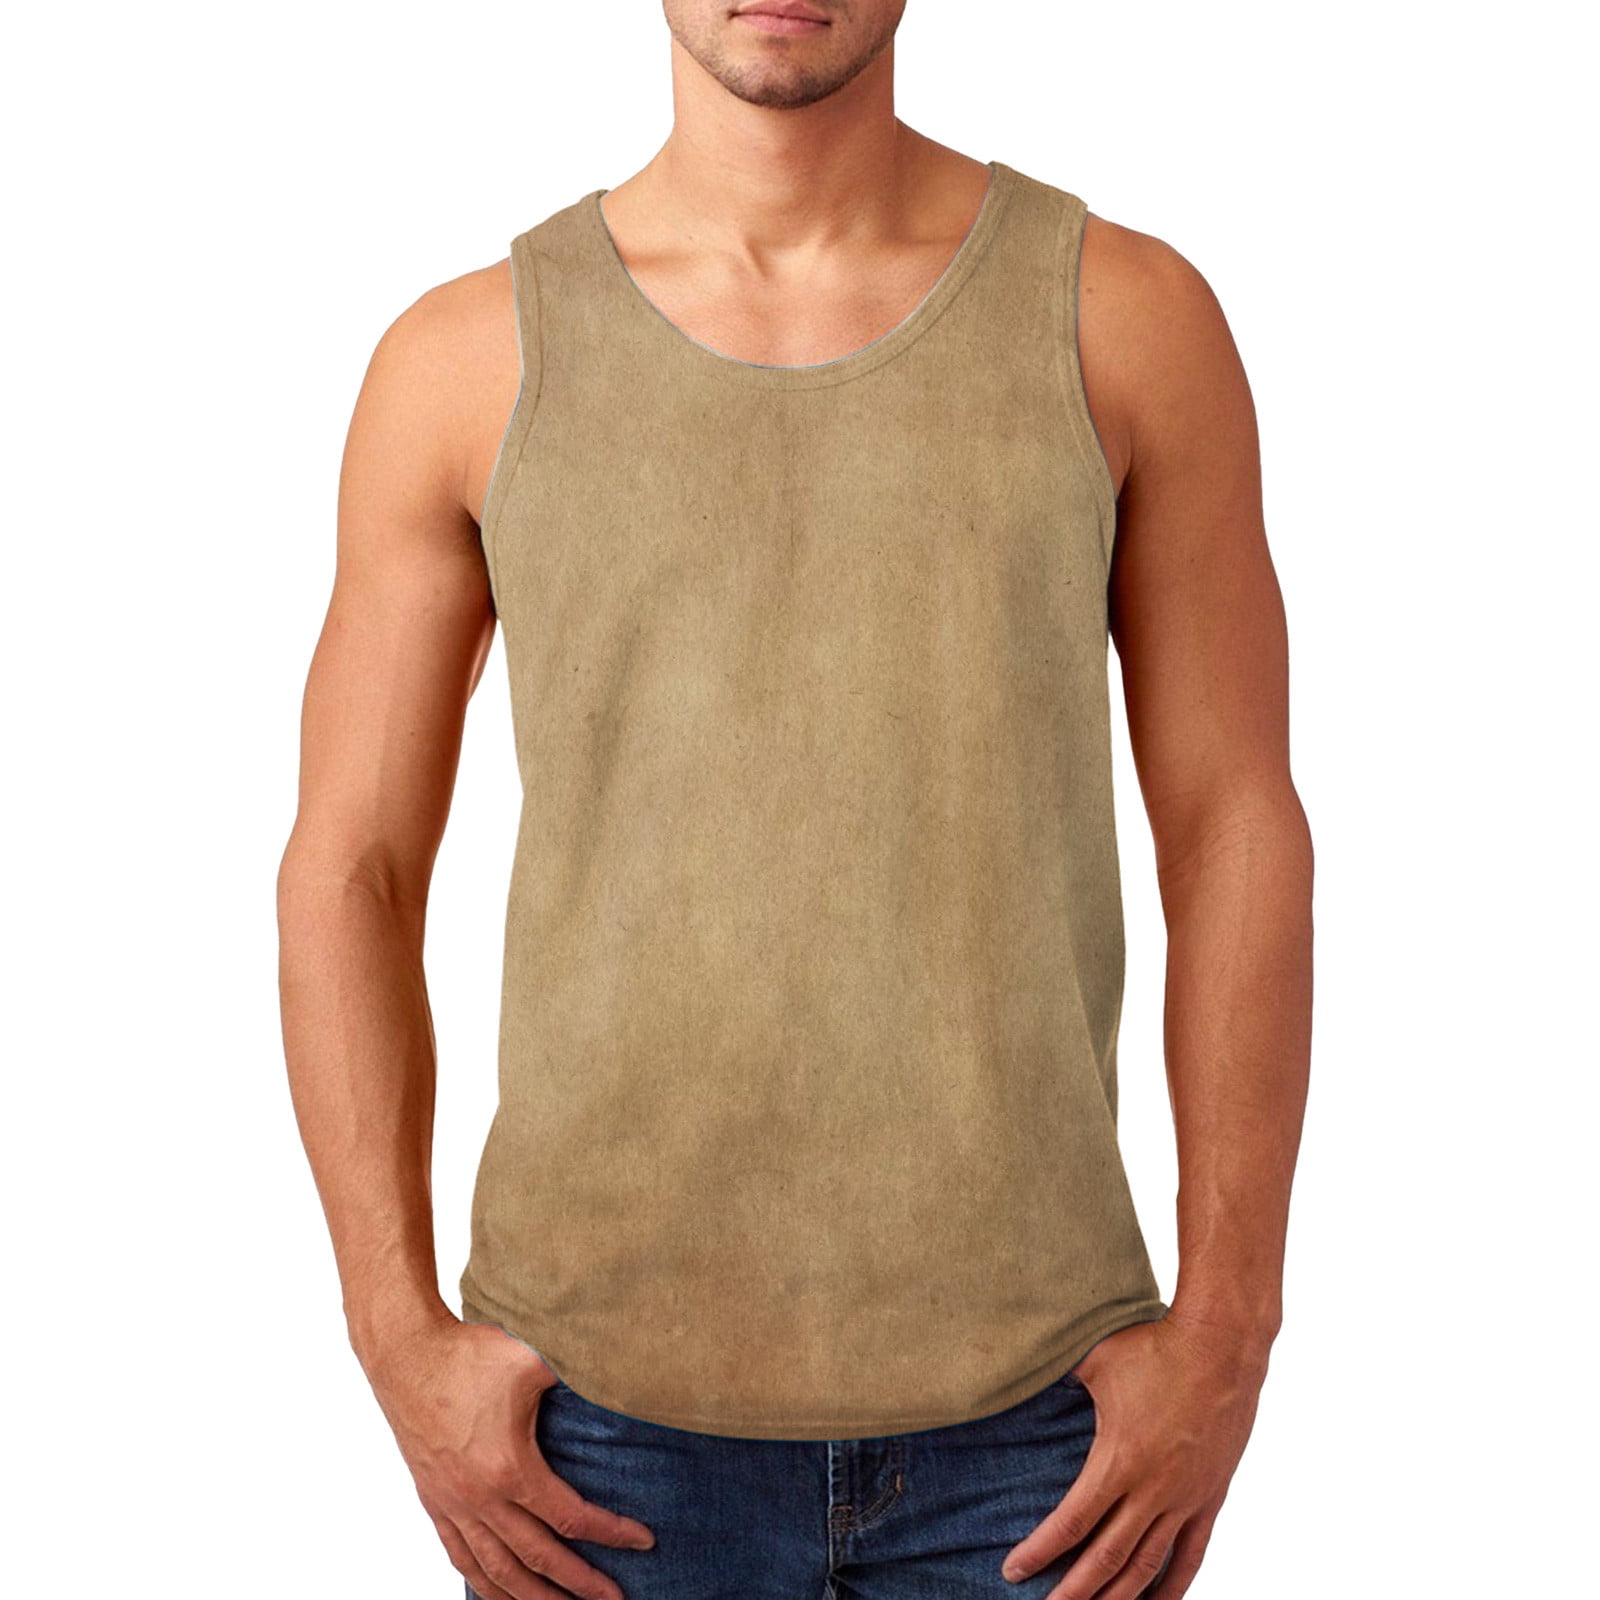 crot Tatica'' Print, Men's Graphic Tanktop, Casual Loose Breathable  Sleeveless Shirt For Summer, Men's Clothing - Temu Philippines